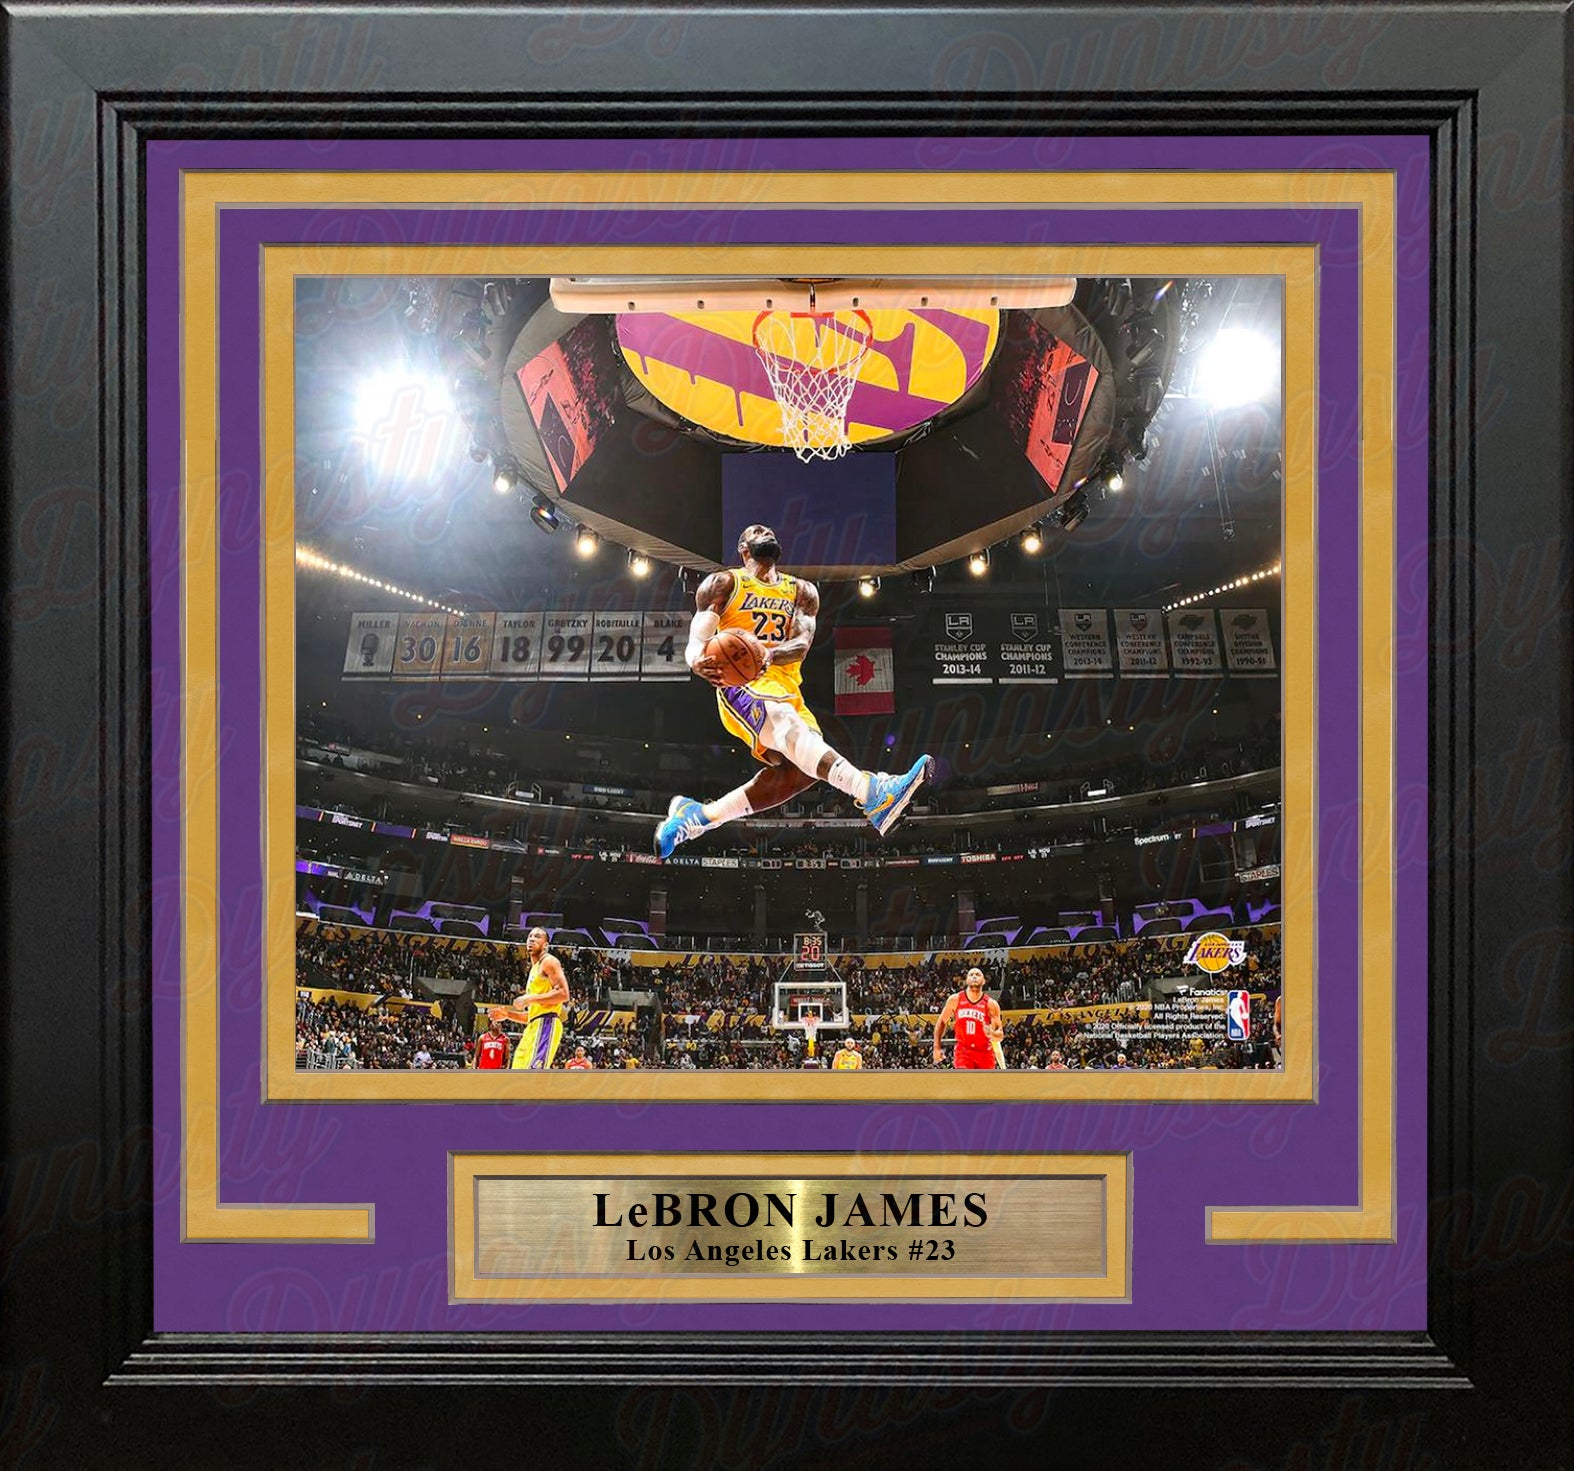 LEBRON JAMES Autographed NBA Game-Used Floor With “Destiny” 10x8 Photo  Curve Display UDA - Game Day Legends